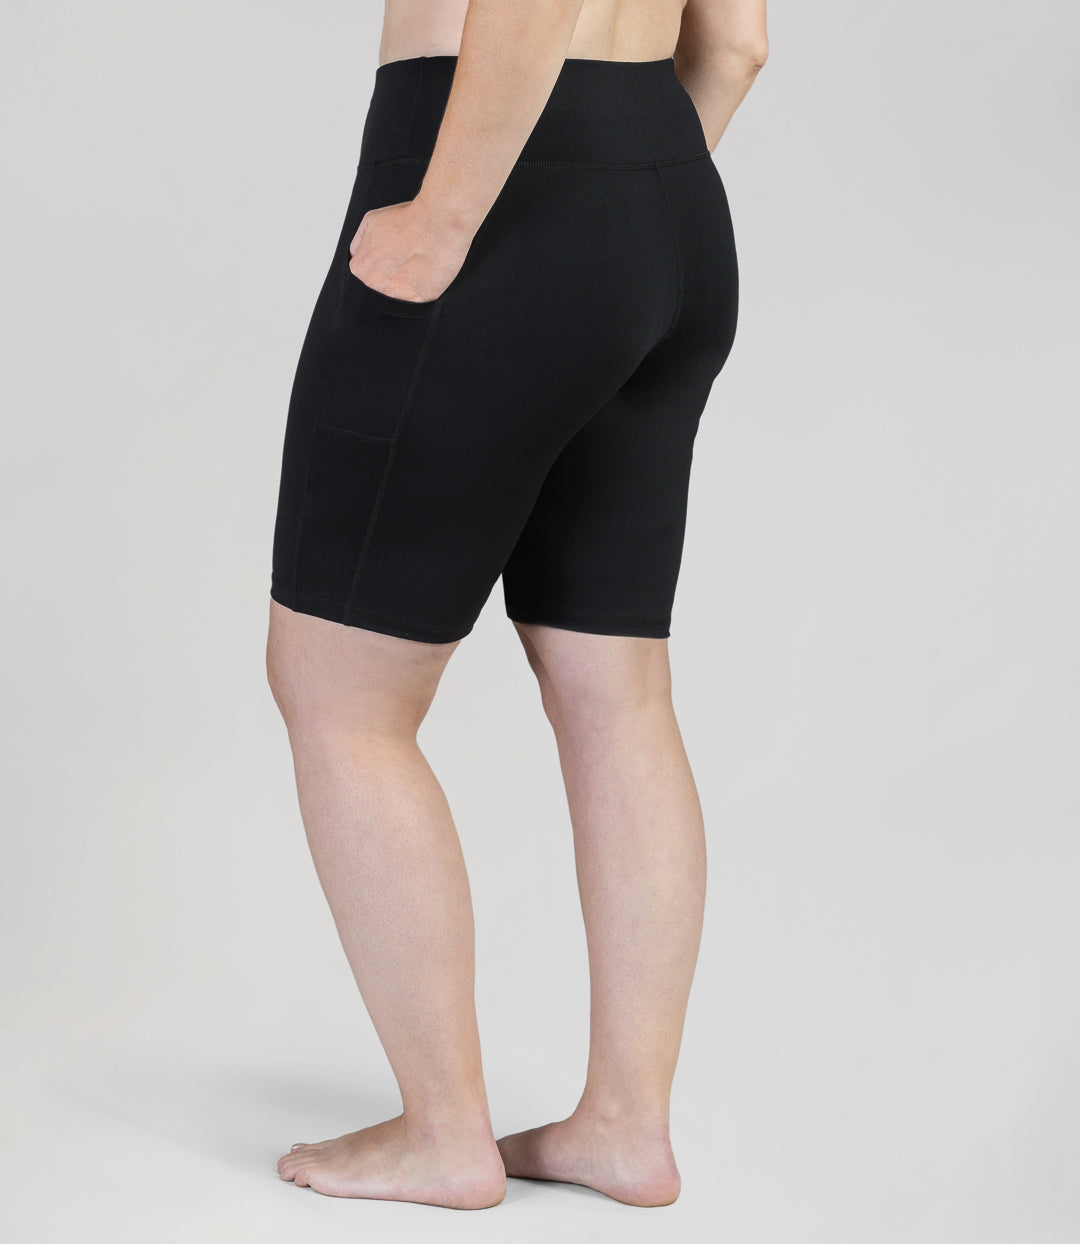 Plus size woman, back view, wearing JunoActive JunoStretch Side Pocket Short in black. The hem is a few inches above the knee.